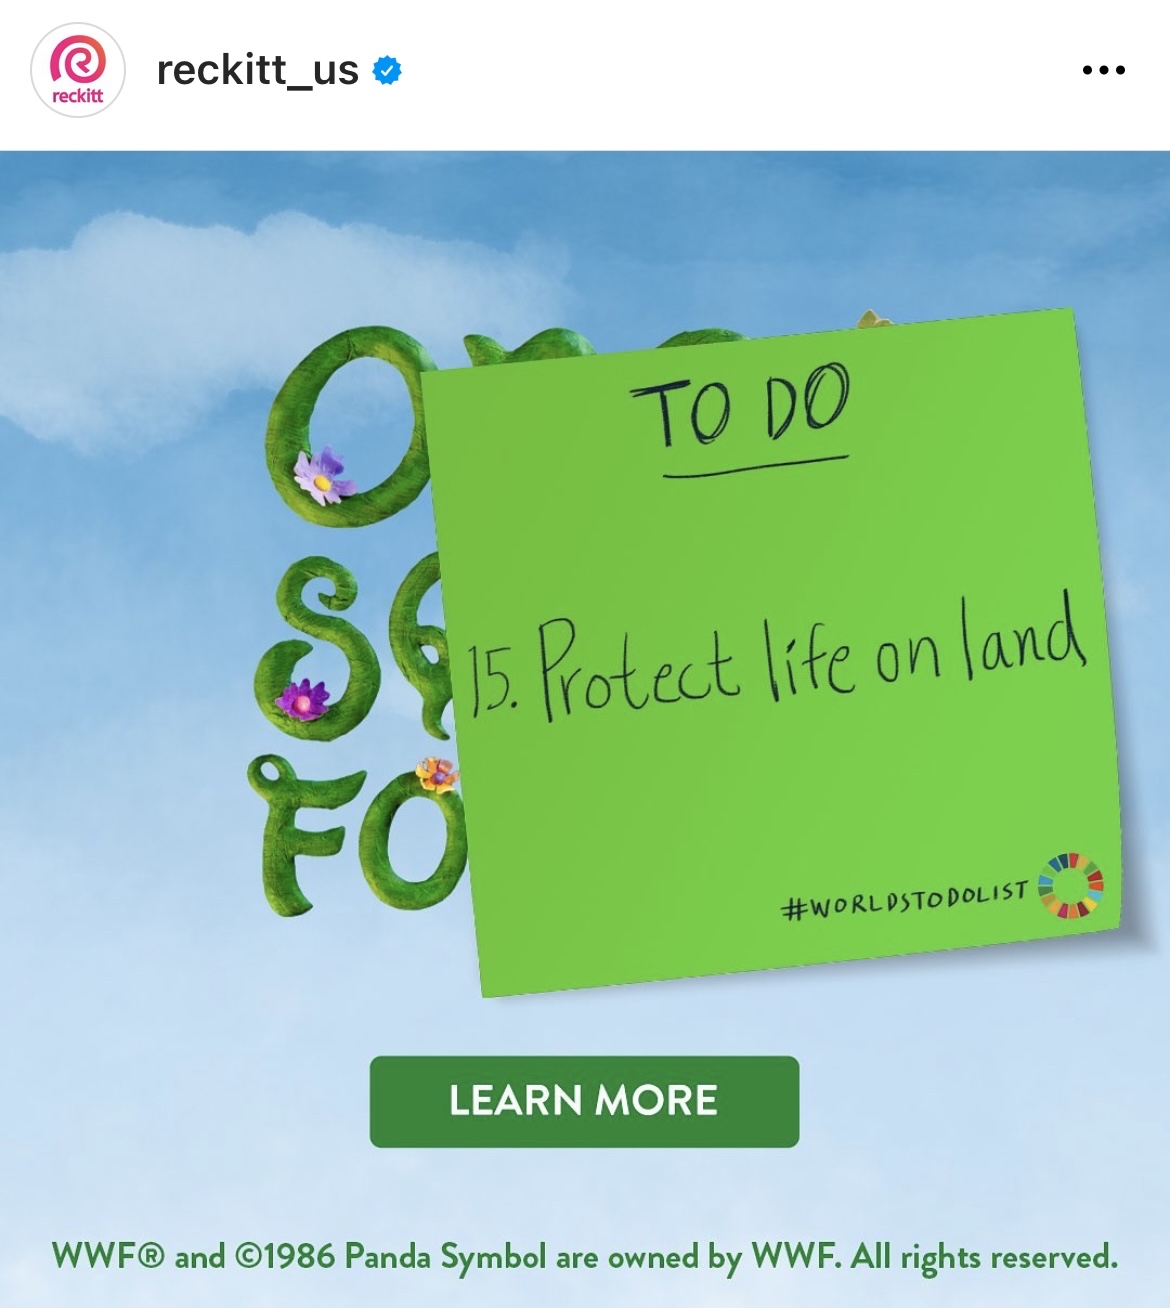 Screenshot of Reckitt US social post. Post-it note reads To Do 15. Protect life on land.